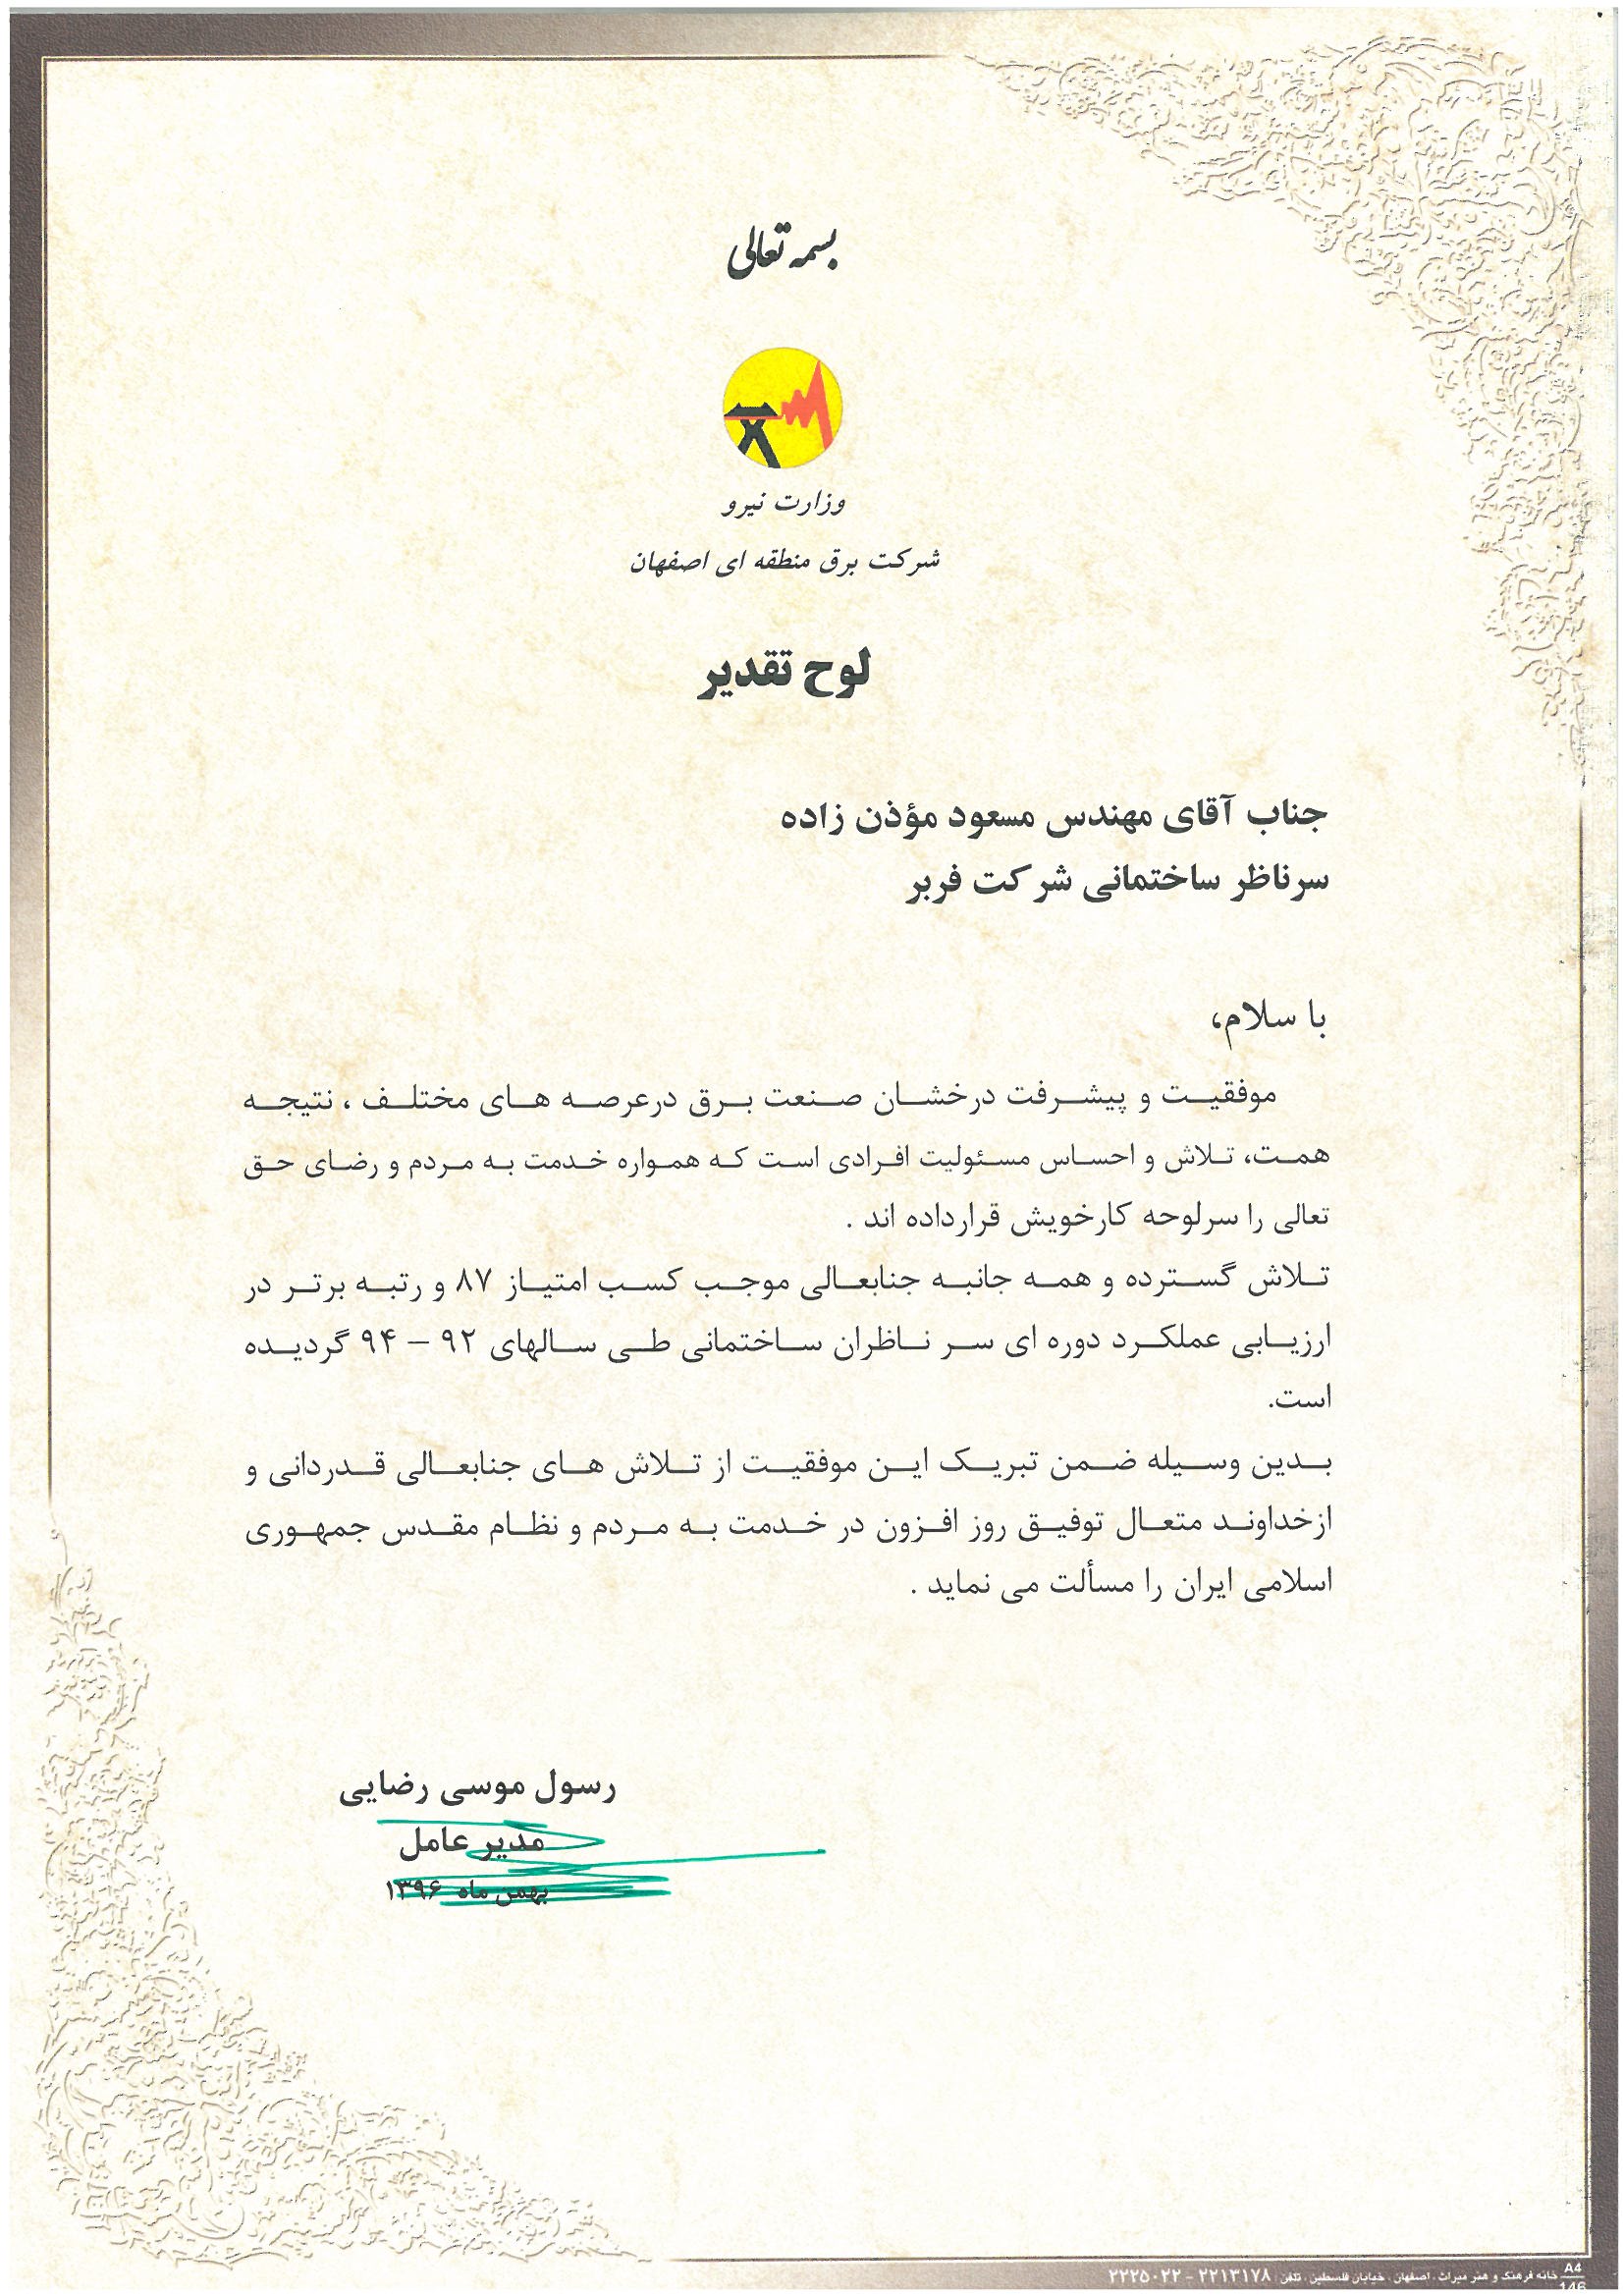 Isfahan Regional Electricity Project - Isfahan Regional Electricity Company Certificate of Appreciation